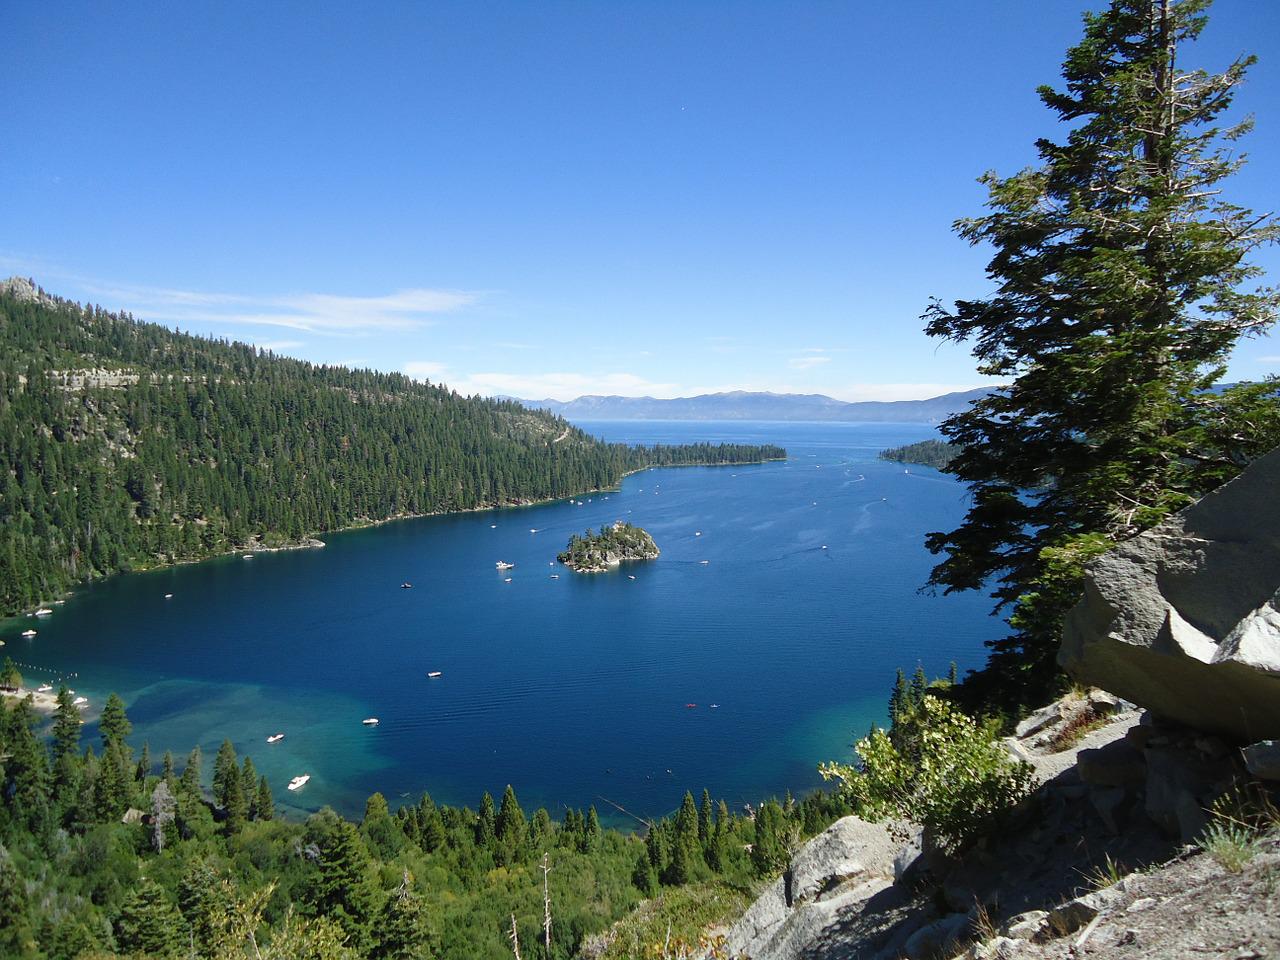 Views of one of our Lake Tahoe State Parks